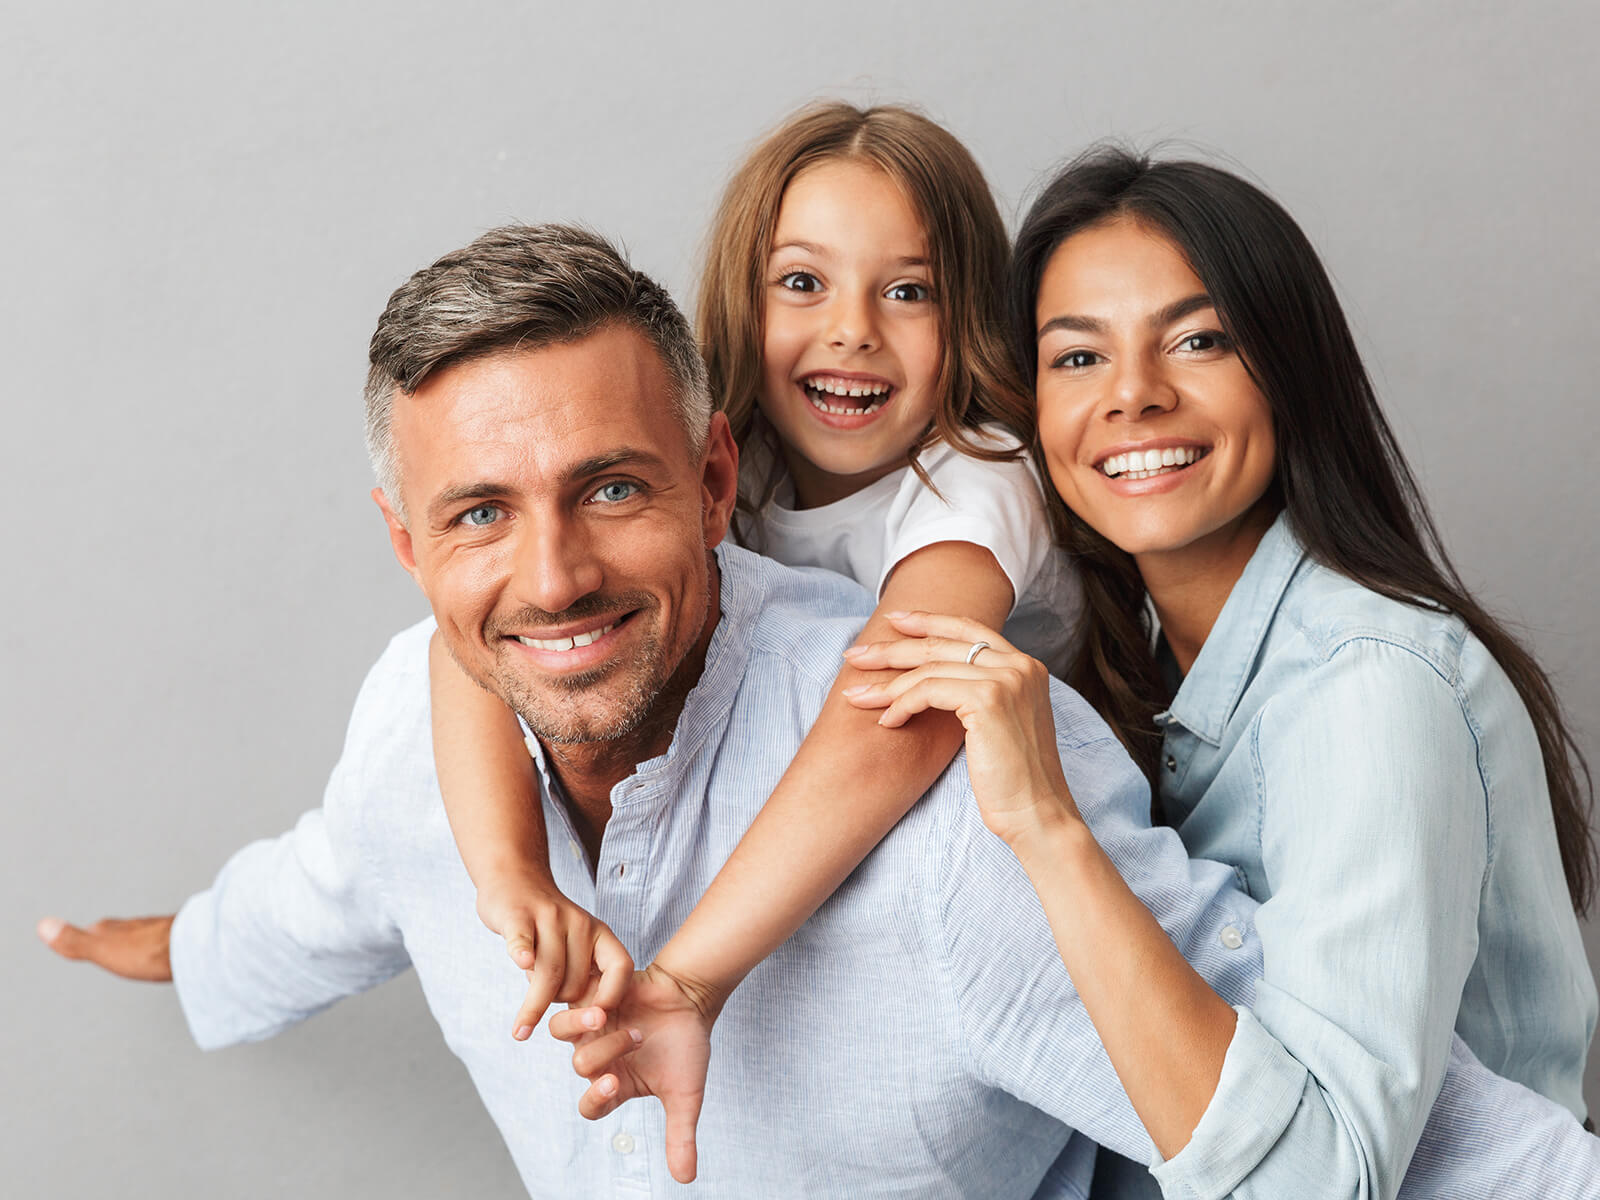 5 Tips For Keeping Your Family’s Smiles Healthy